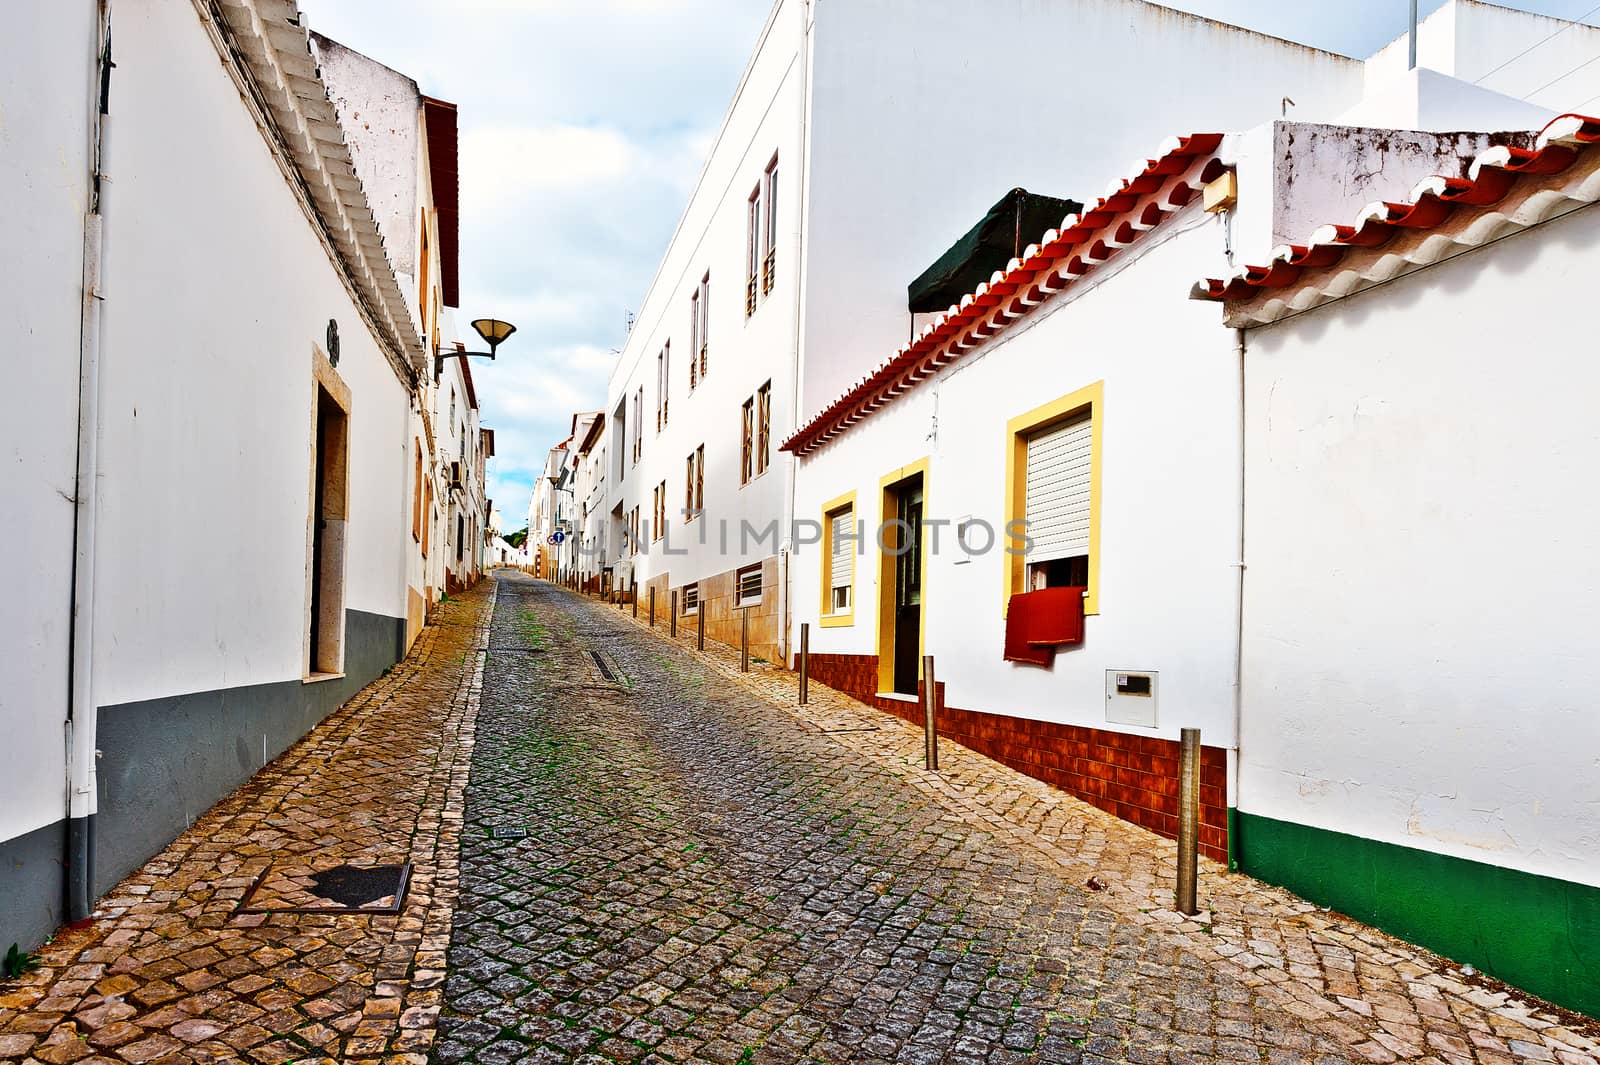 Narrow Street in the Medieval Portuguese City of Logos 